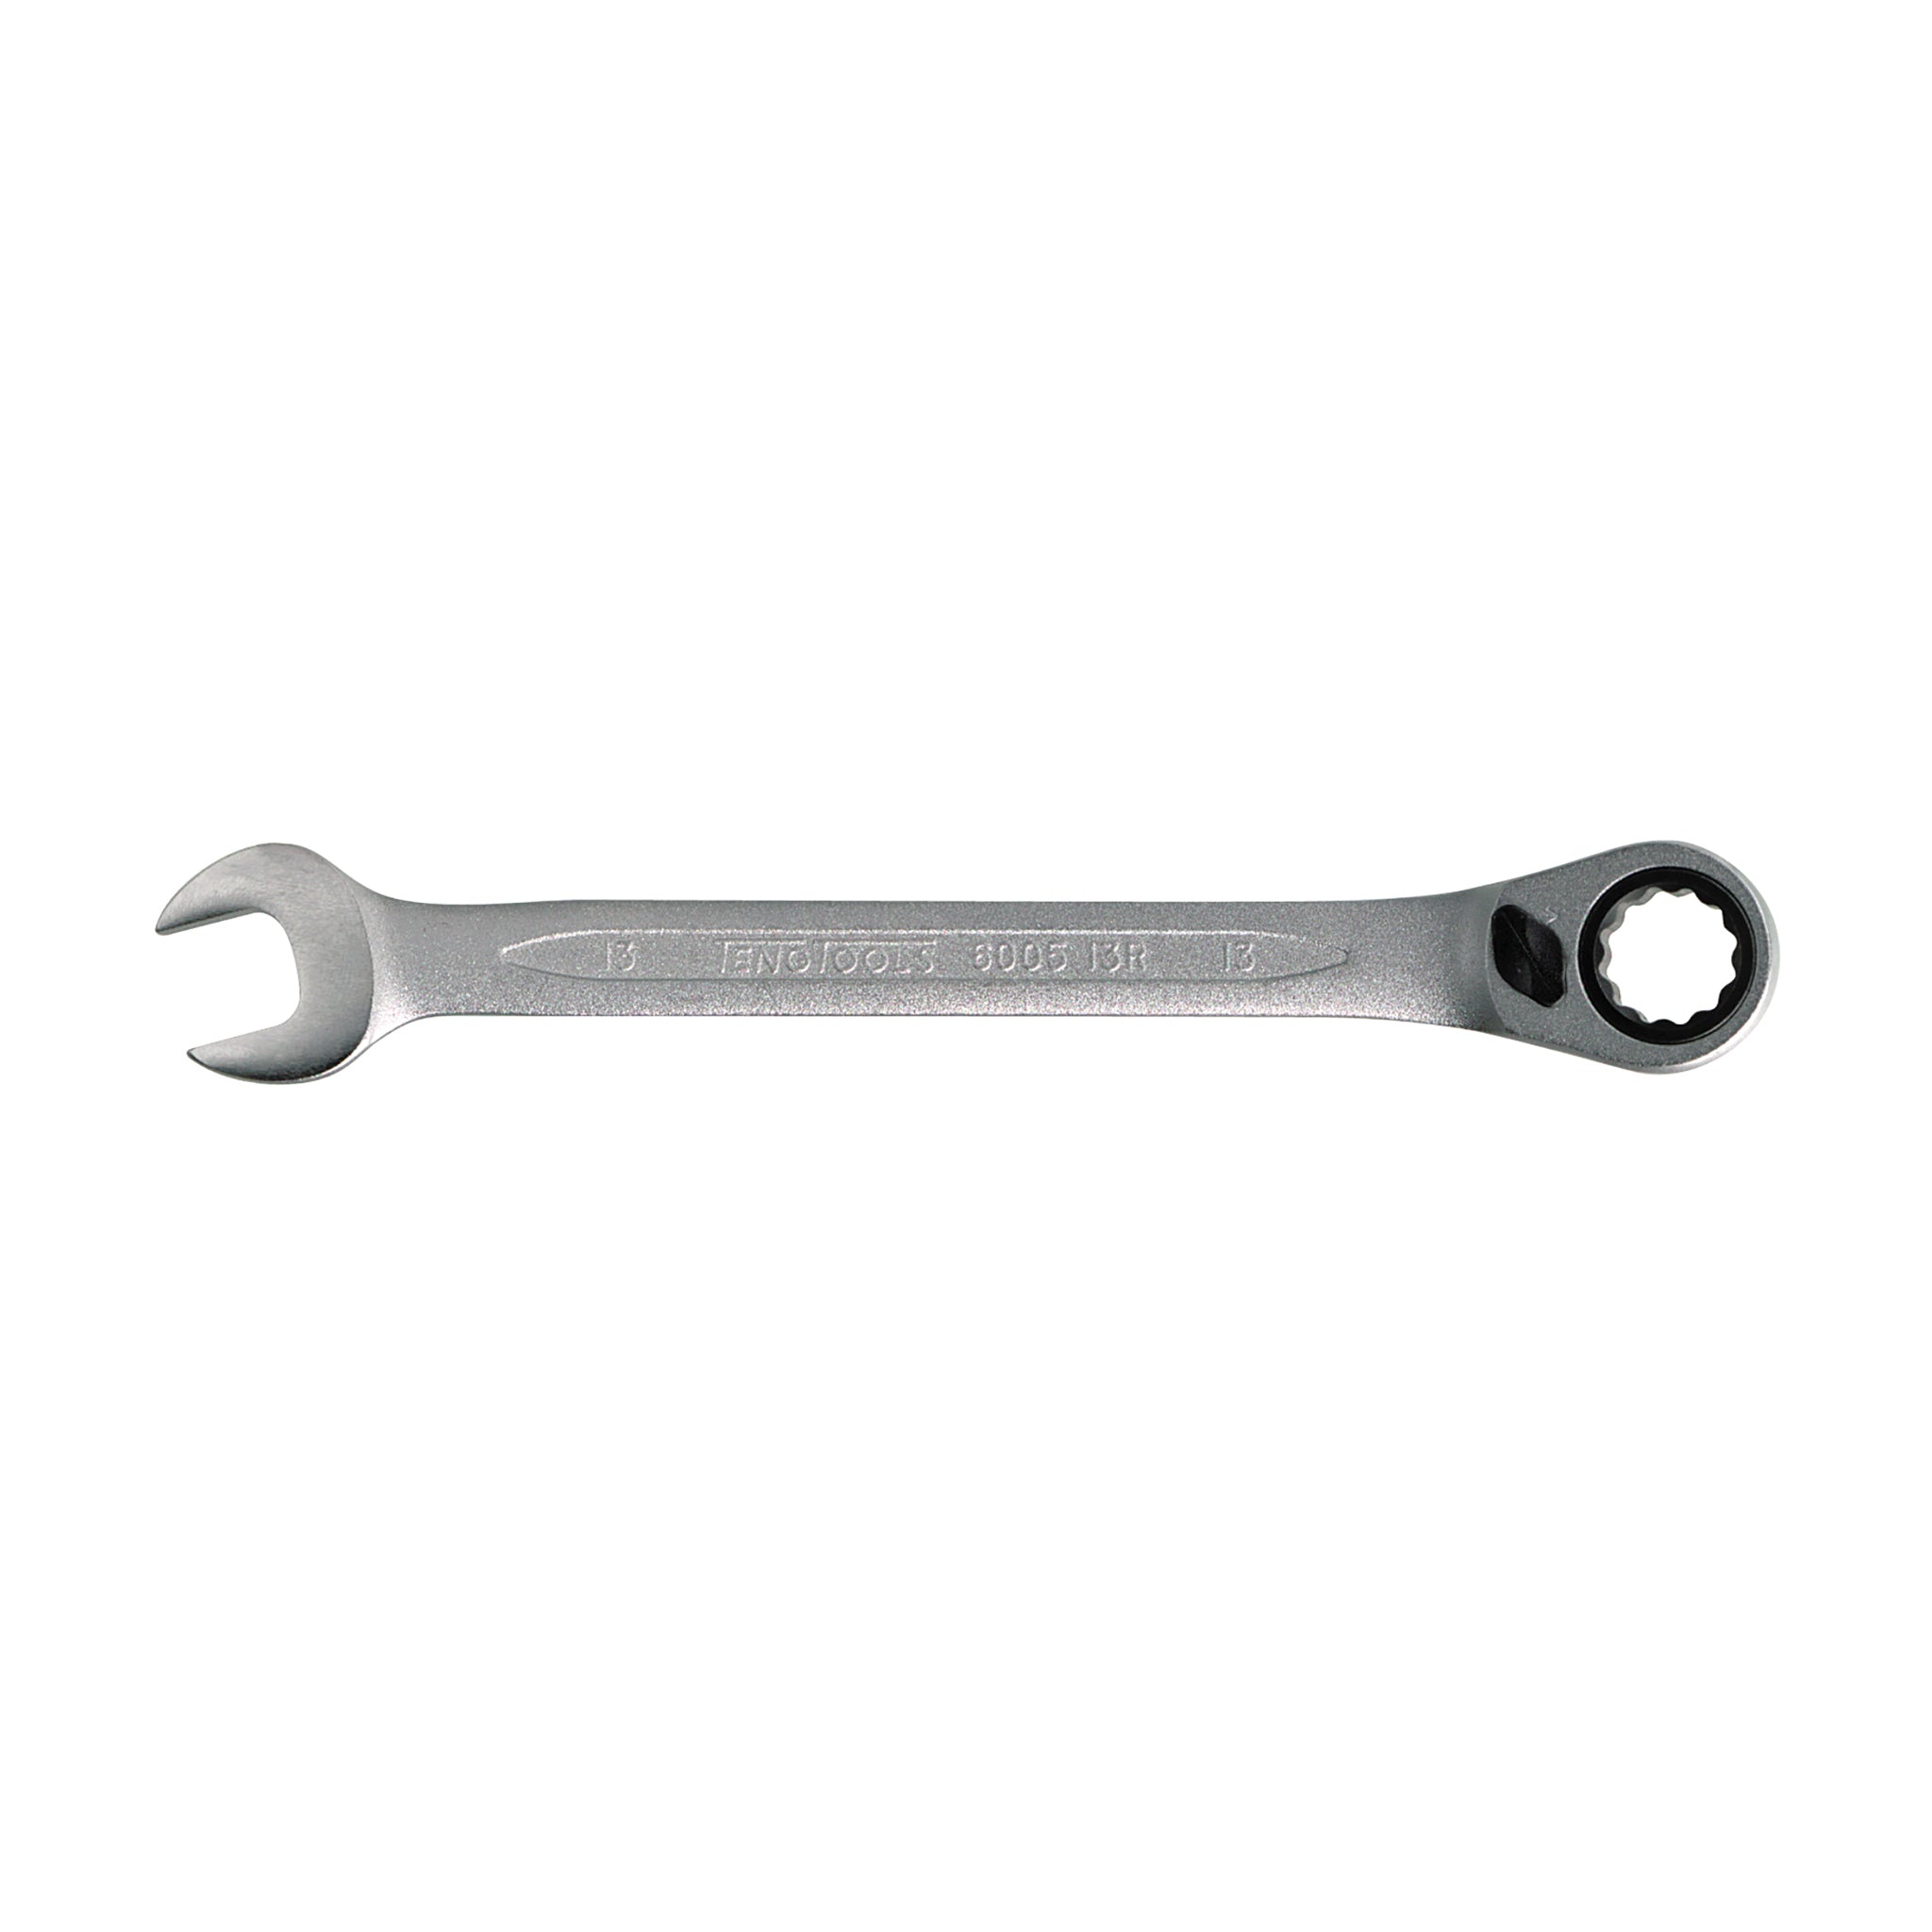 72 Teeth Ratchet Combination Metric Wrenches With Flip Reverse Lever - 19mm